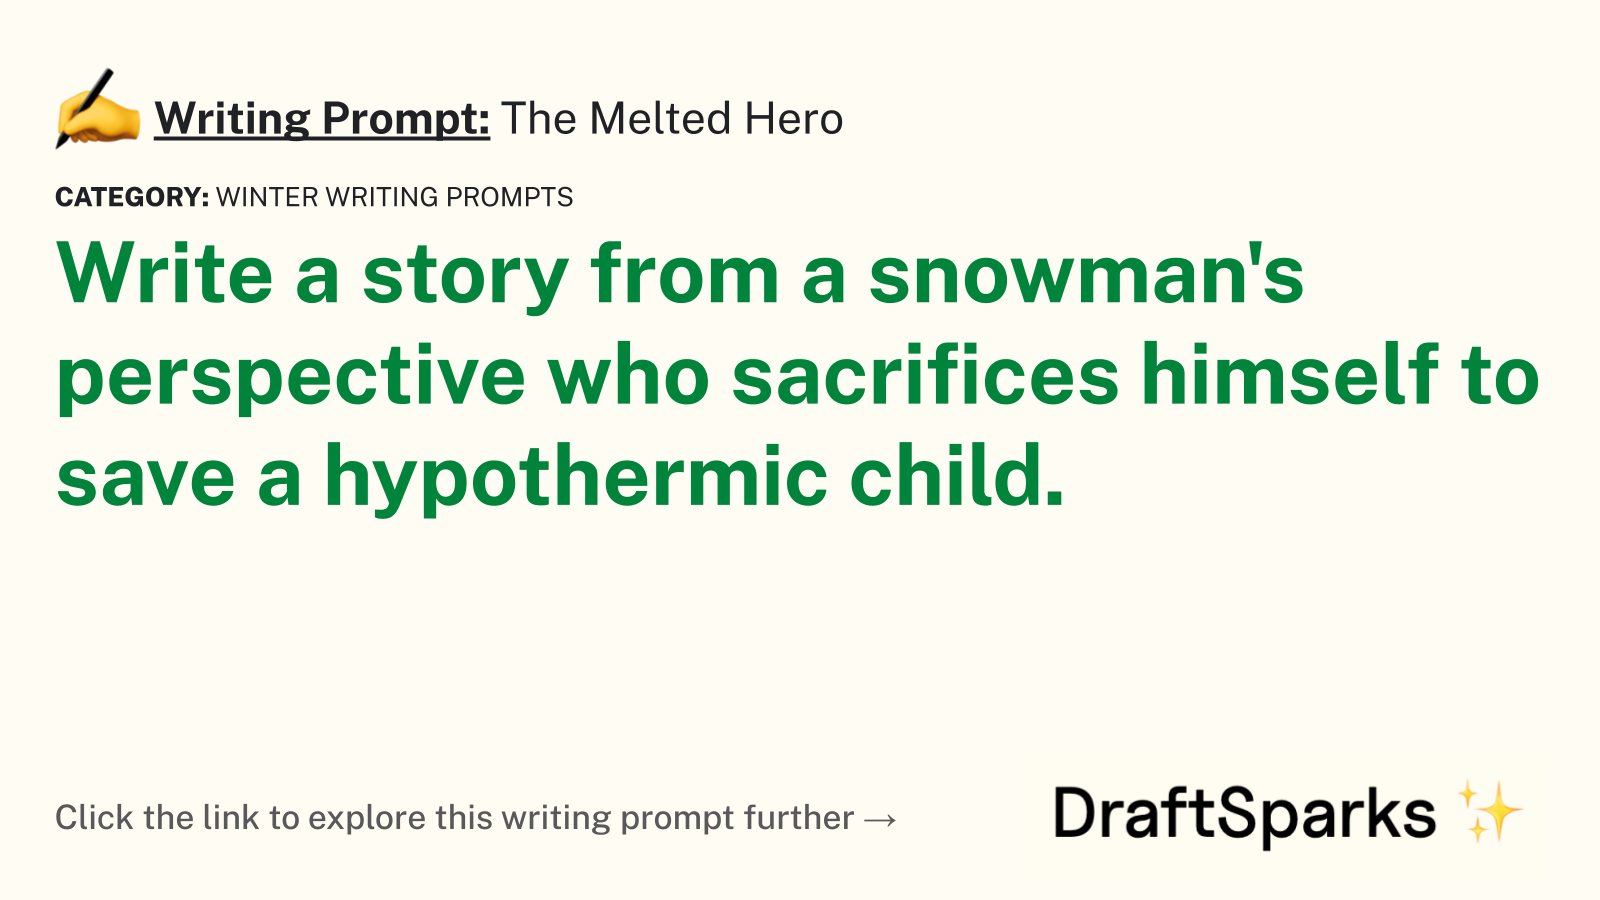 The Melted Hero